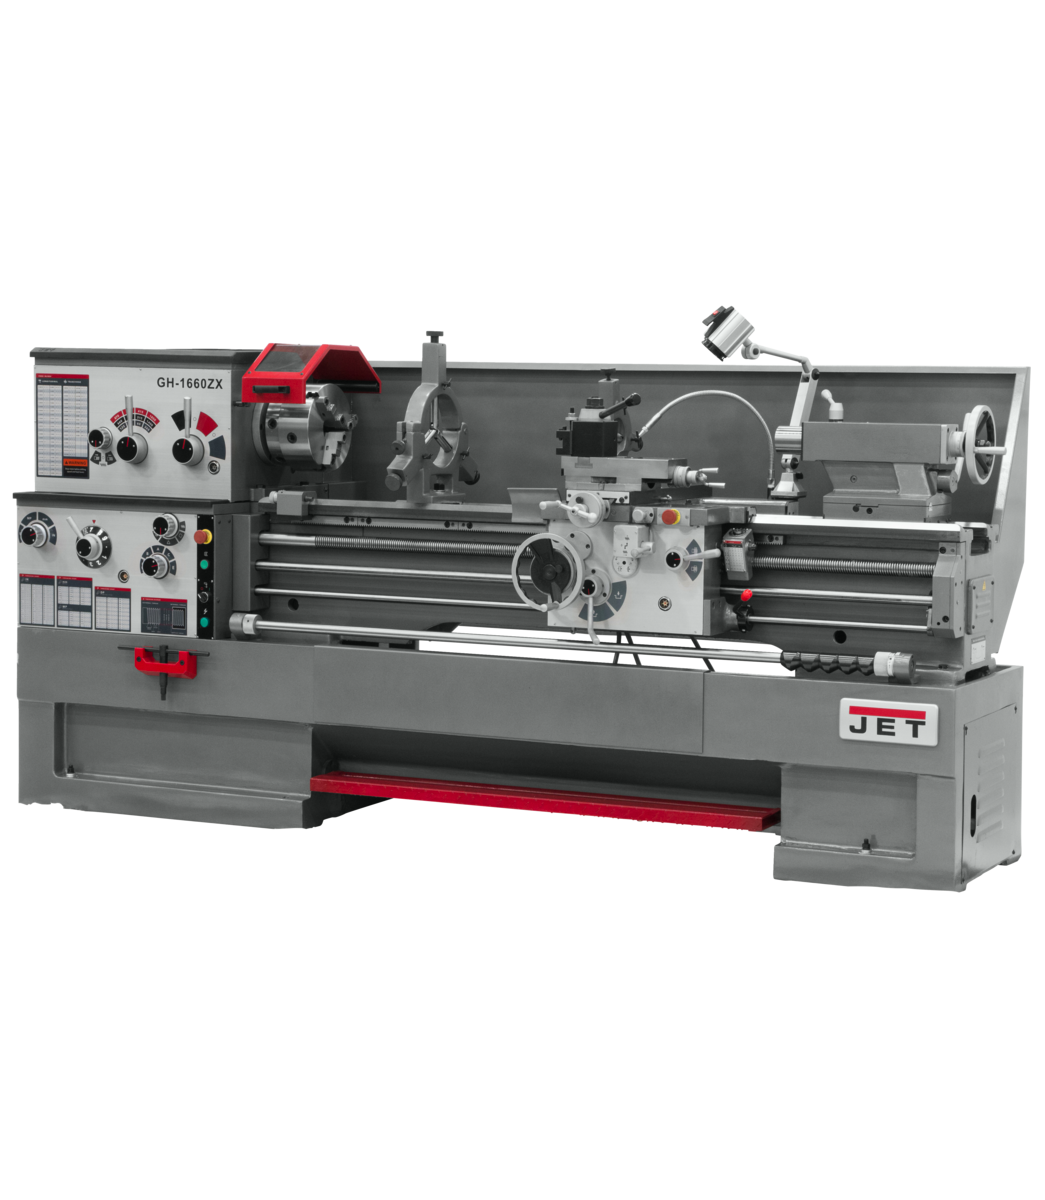 321961, GH-1860ZX , 18" Swing, 60" Between Centers, GH-1860ZX WithTaper Attachment and Collet Closer installed, Jet, Metalworking, Turning, Lathes